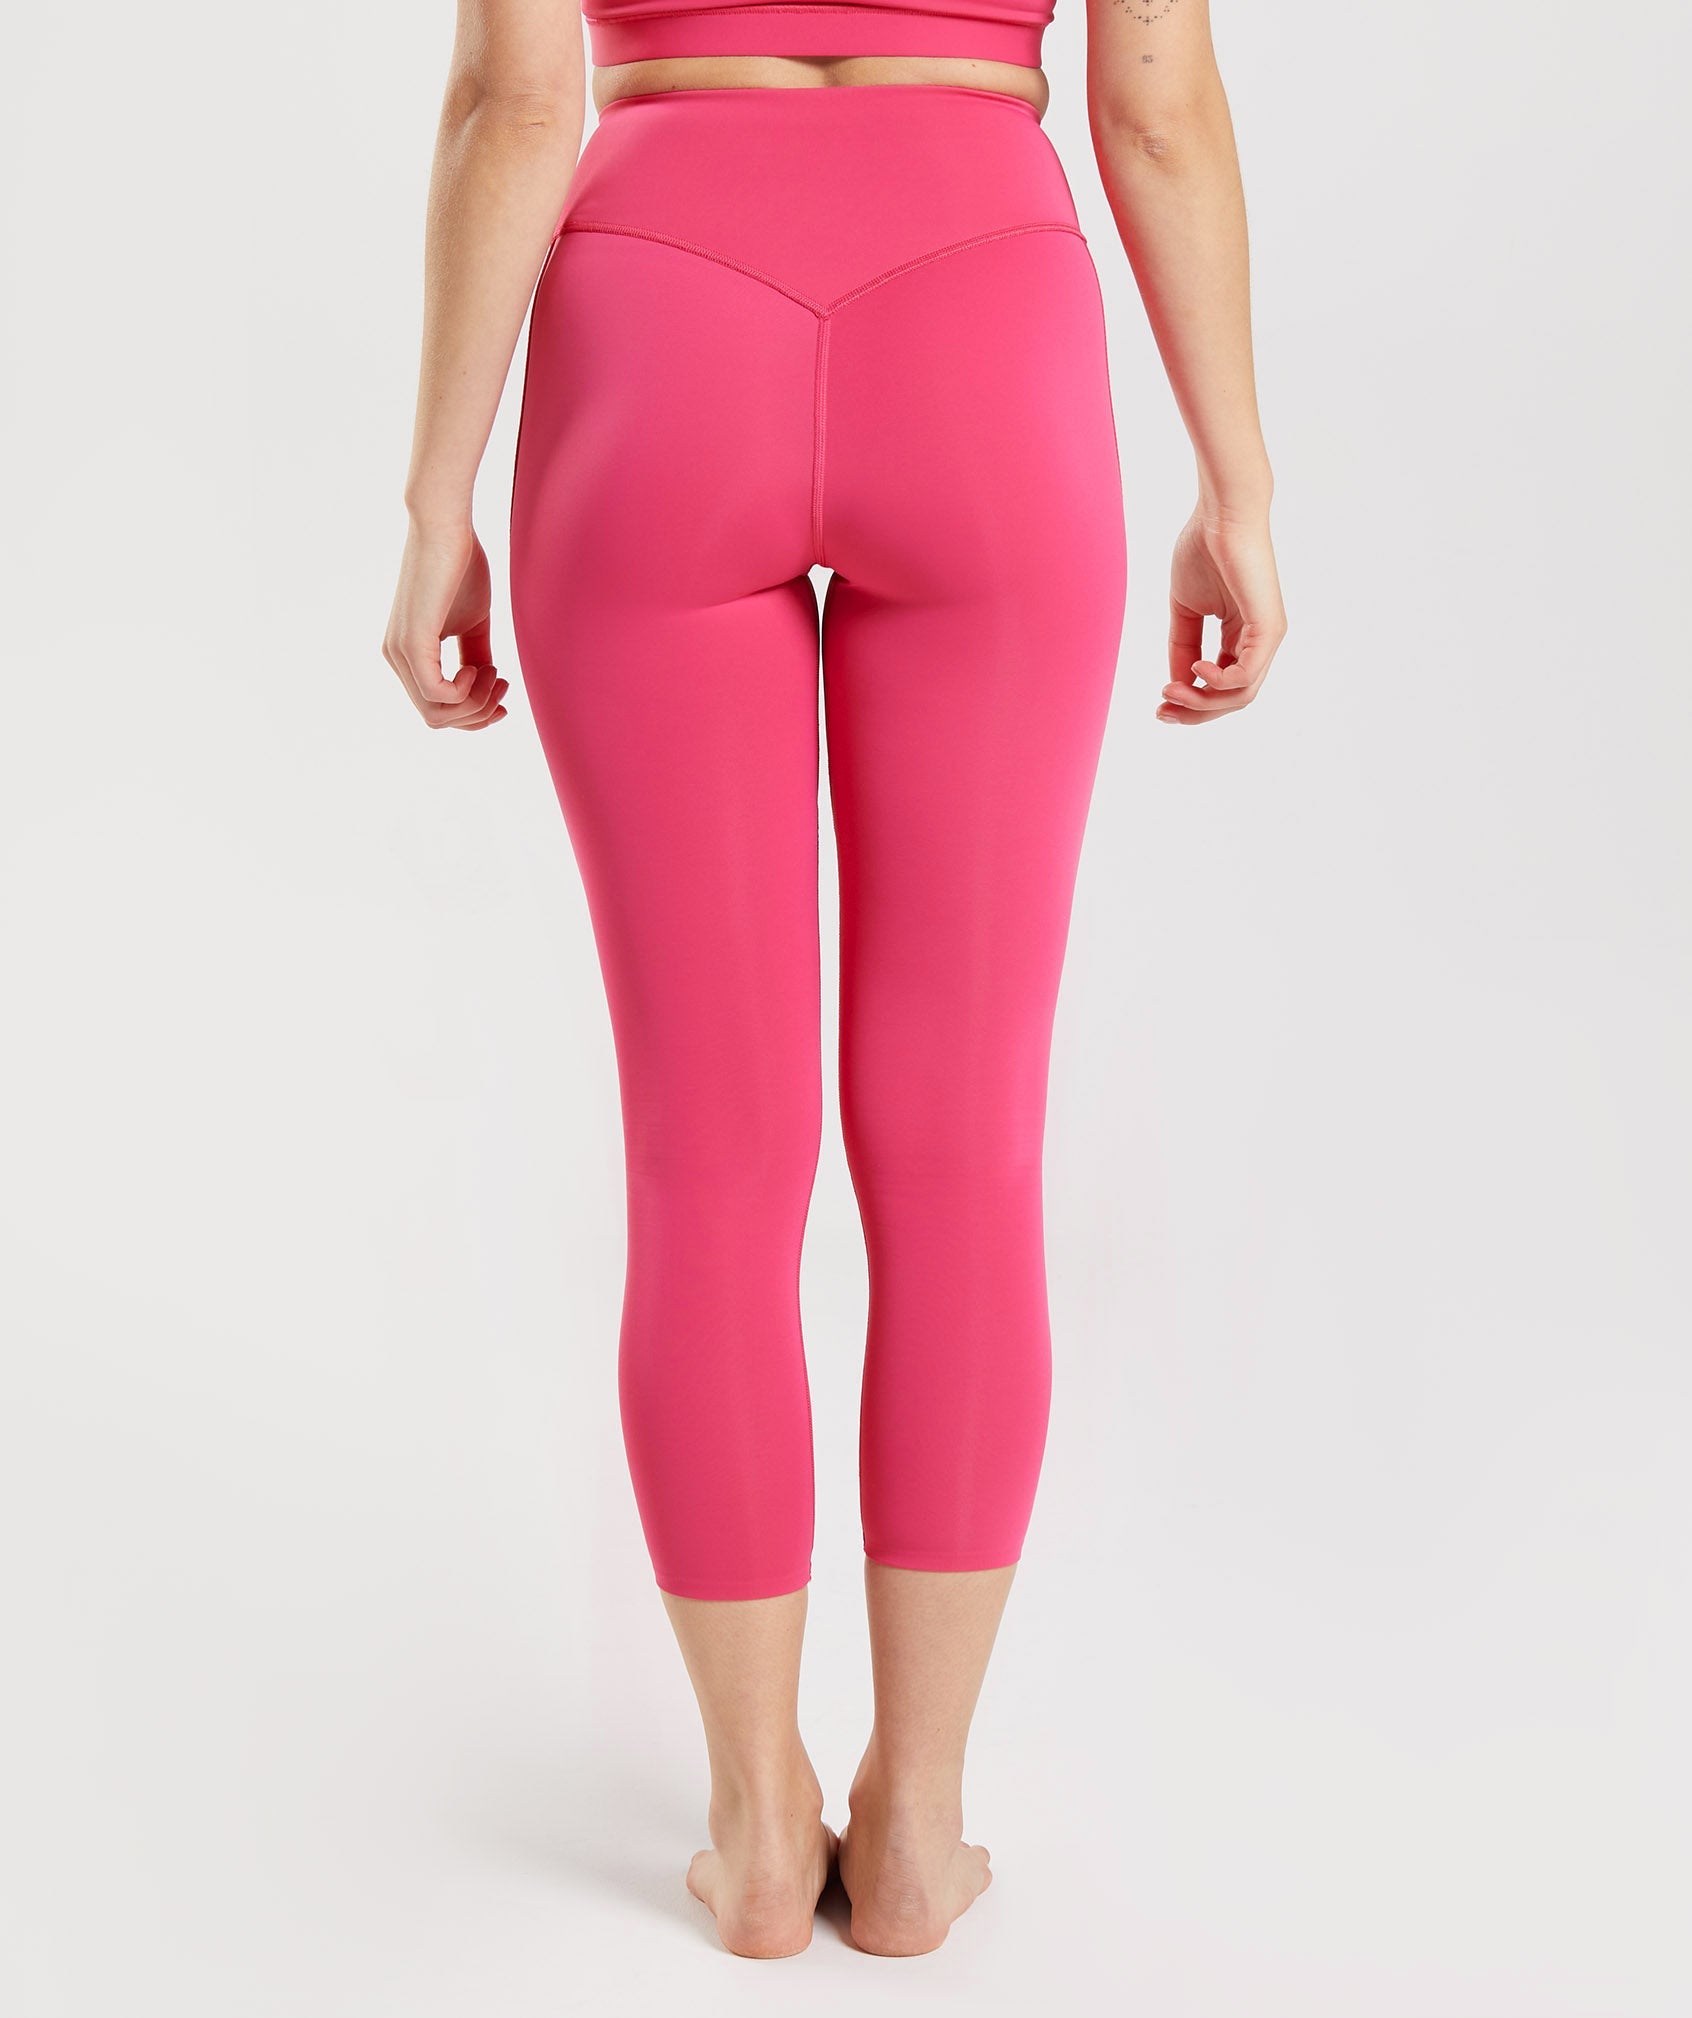 POSITION-LIVE PINK-Yoga Leggings – GoodLife Expressions